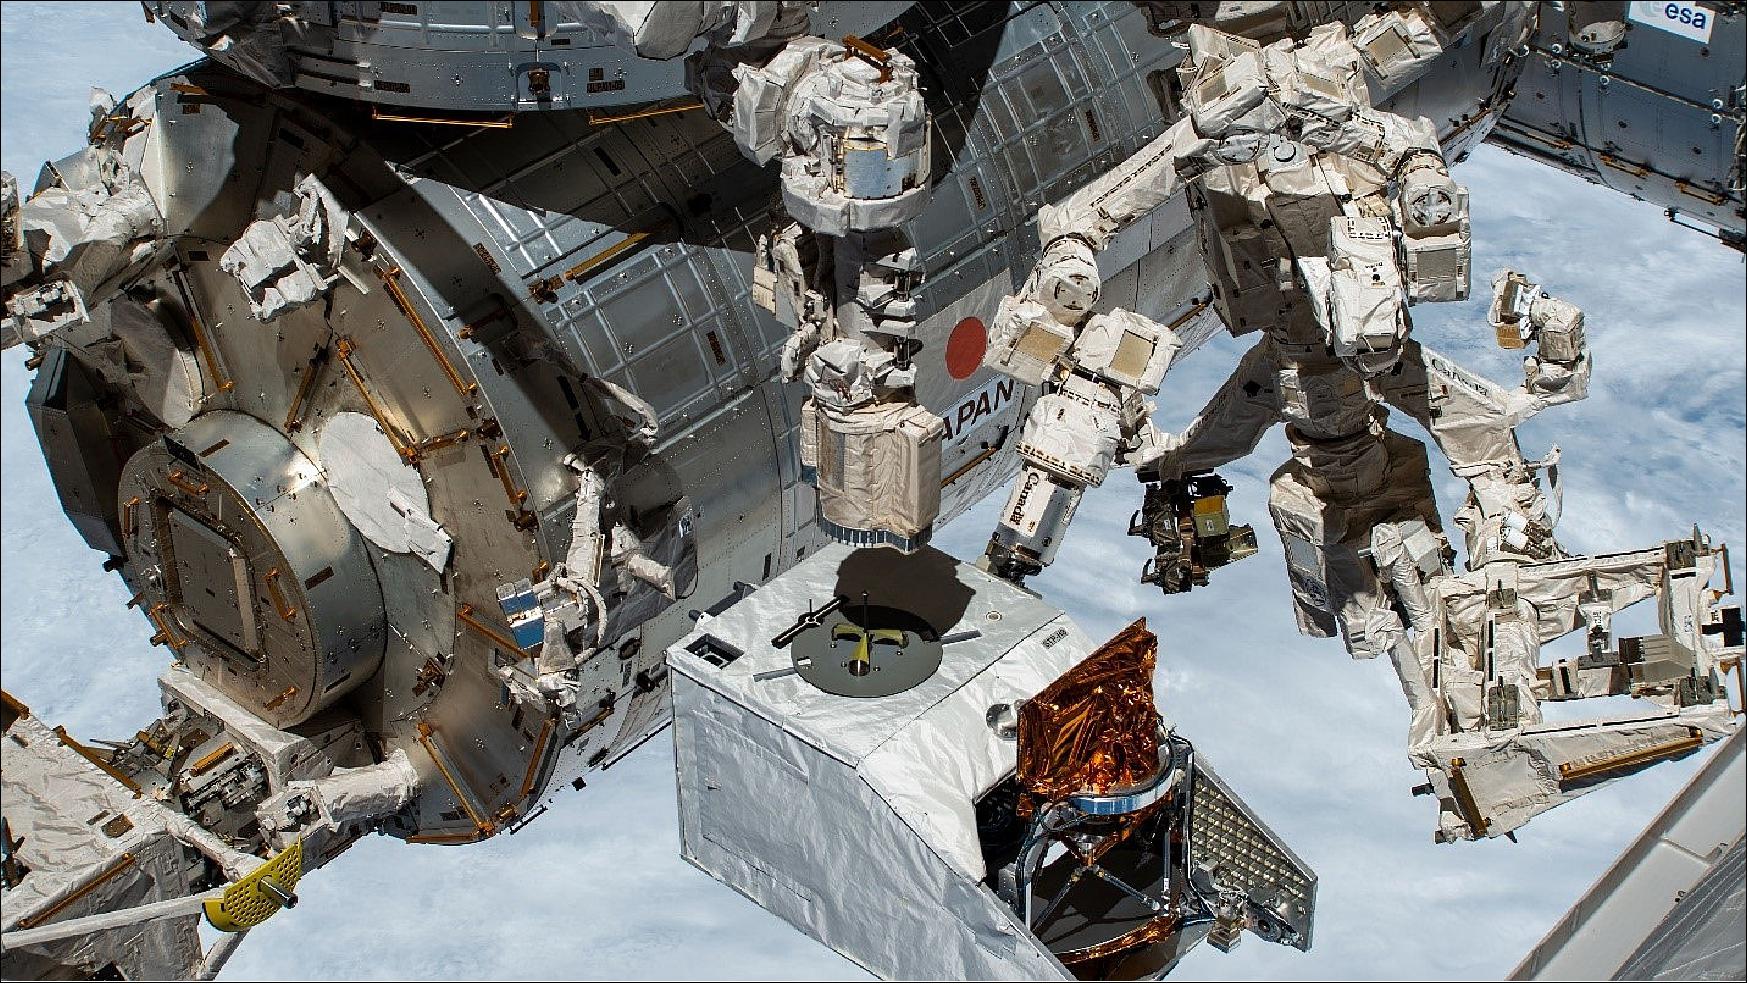 Figure 6: Shown here is the hand-off of the H-8 payload between the NASA’s Special Purpose Dexterous Manipulator (SPDM) and the Japanese Experiment Module Remote Manipulator: the SPDM has the STP-H8 payload by the H-fixture and the JEMRMS is shown descending to grab the Fixed Releasable Grapple Fixture (FRGF), photo courtesy of NASA